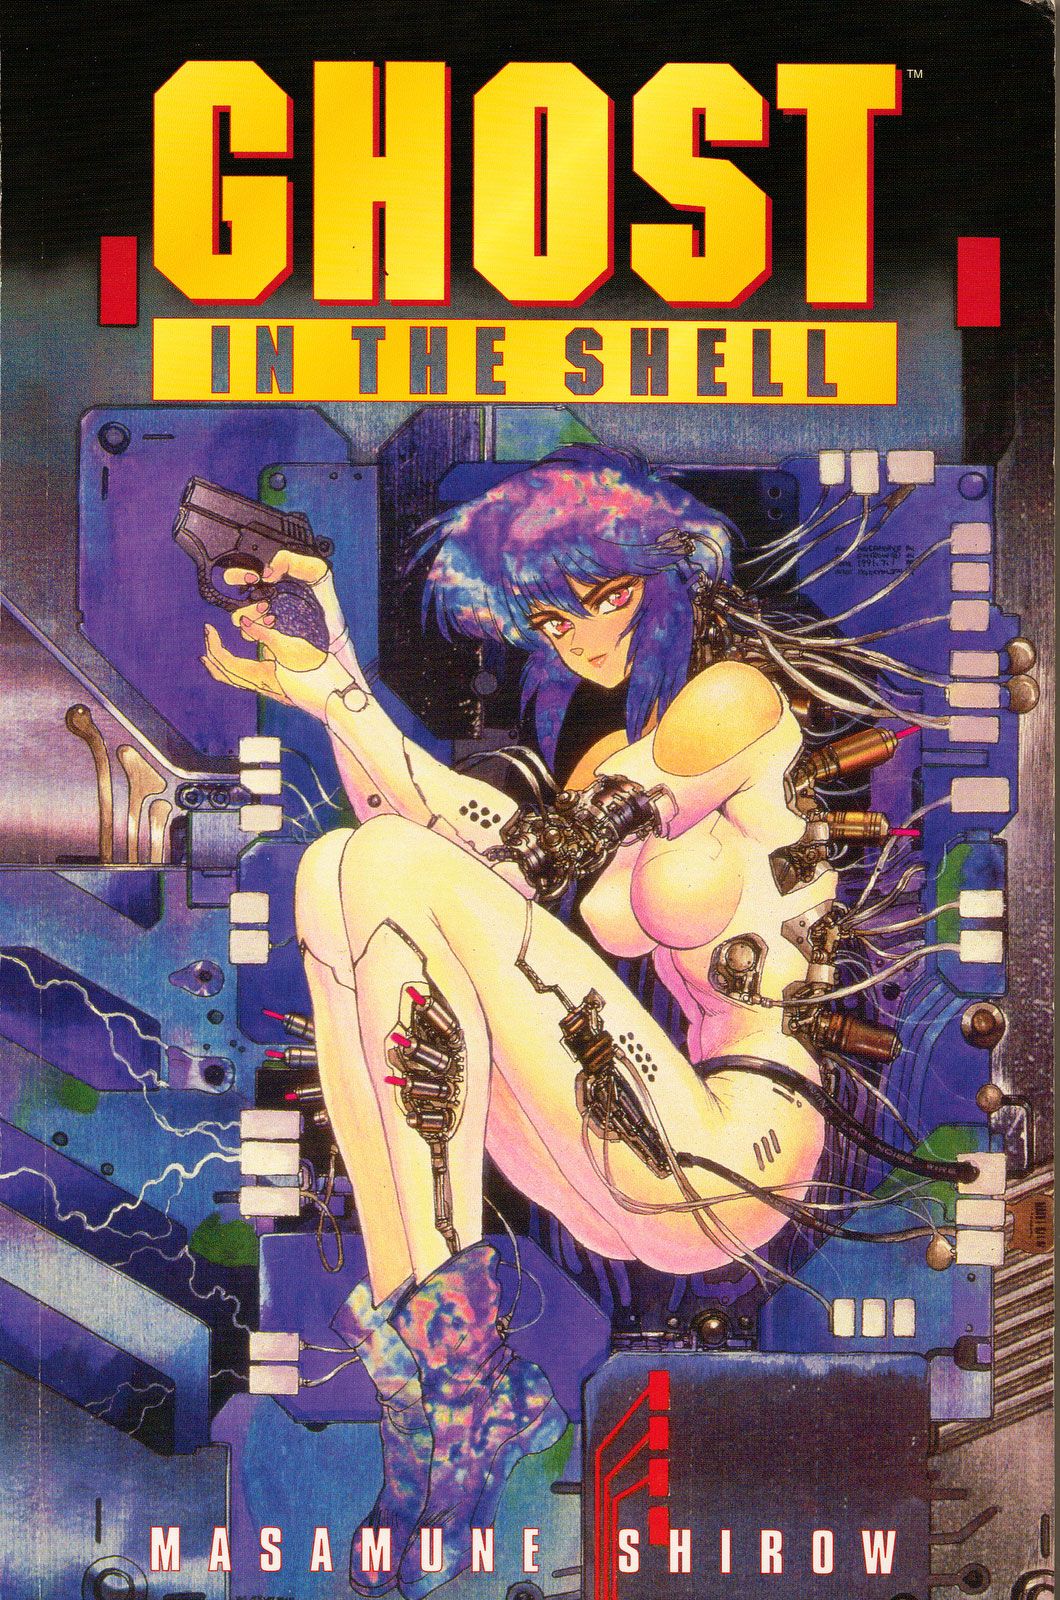 antonio tigre share ghost in the shell sex photos